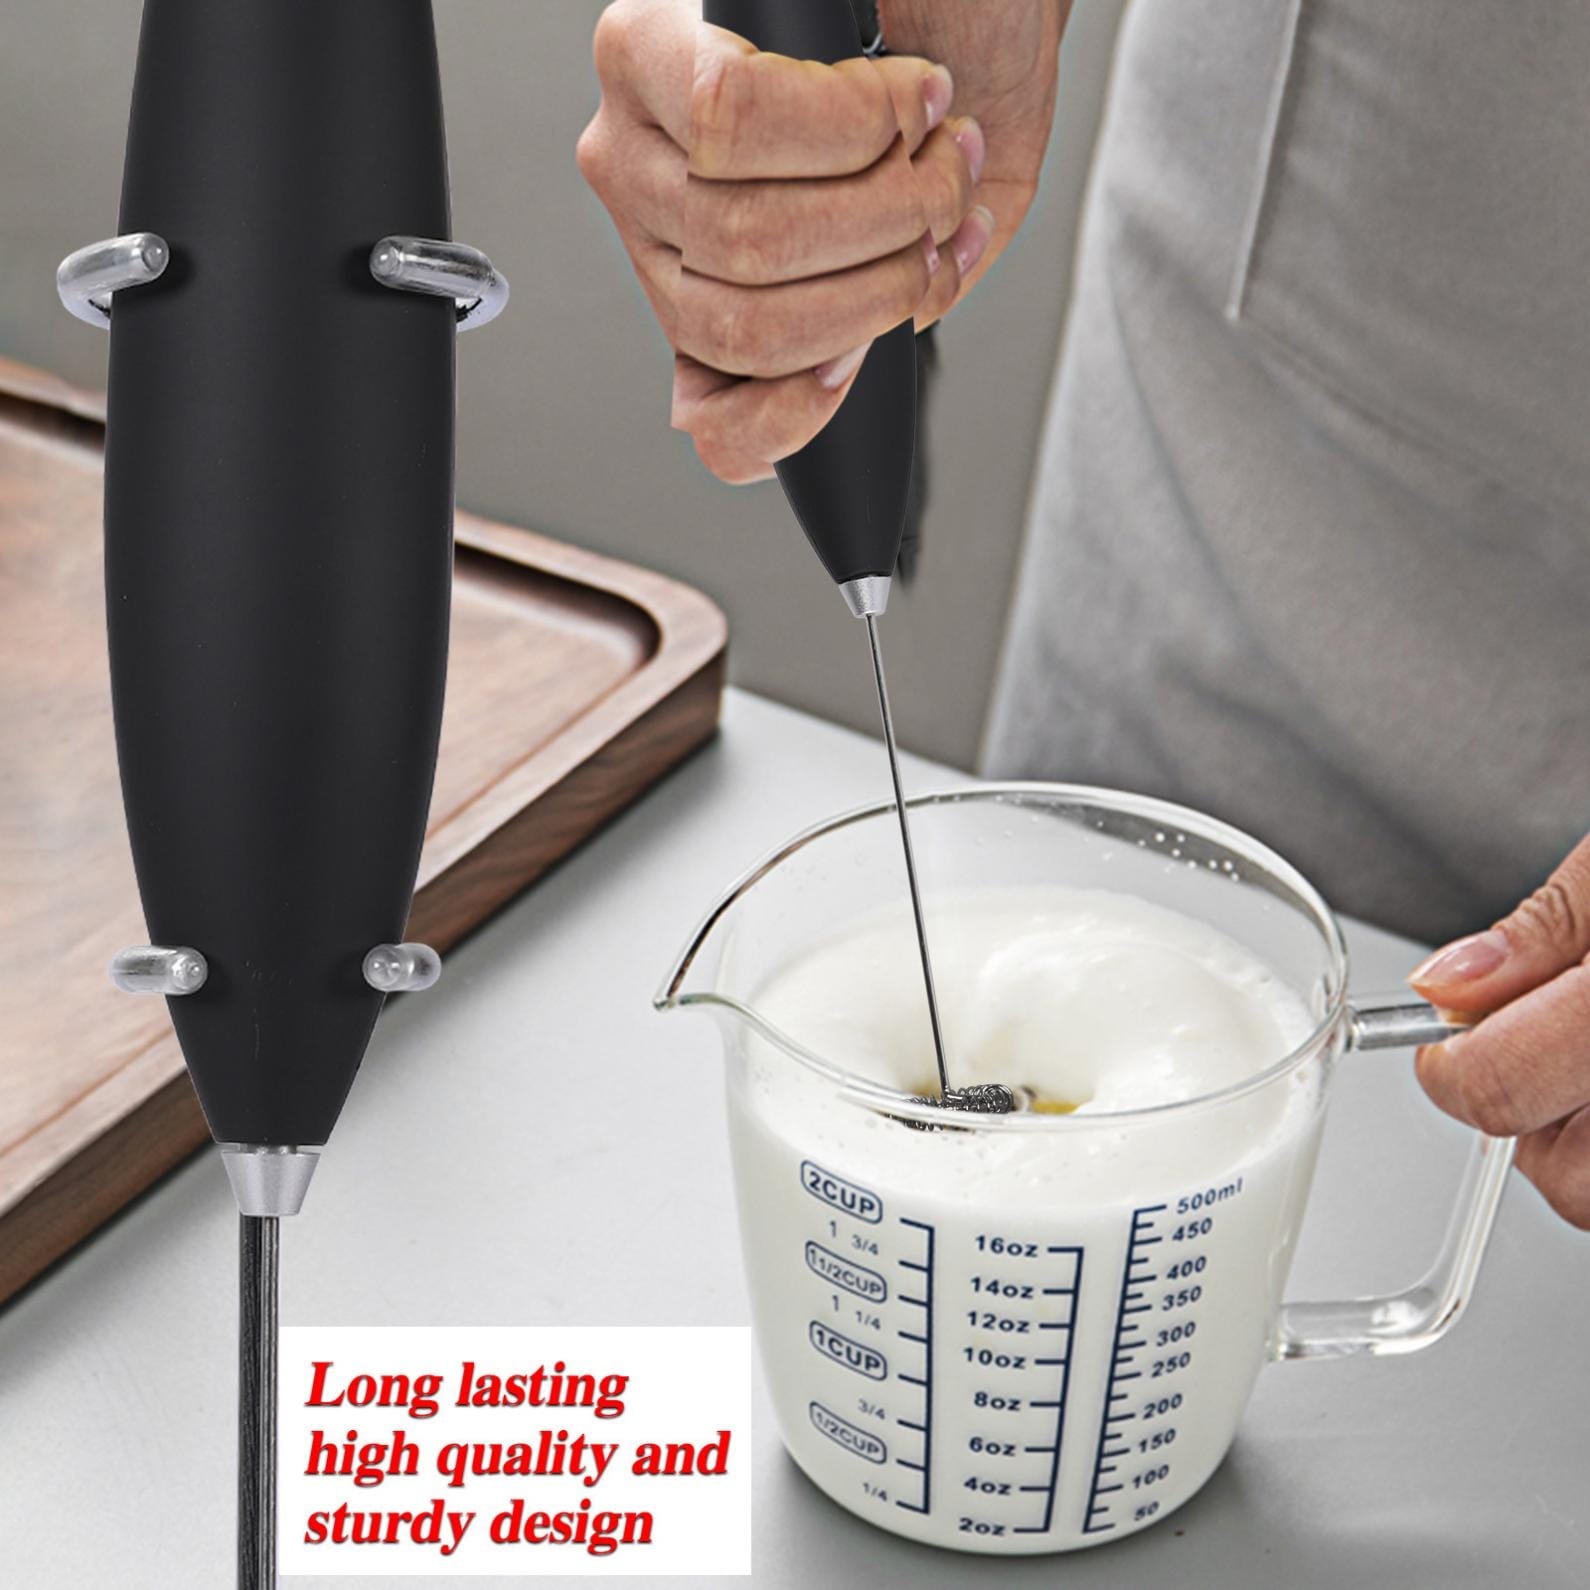 Deco Gear Milk Frother - Handheld Electric Foam Maker for Coffee, Latte, Cappuccino